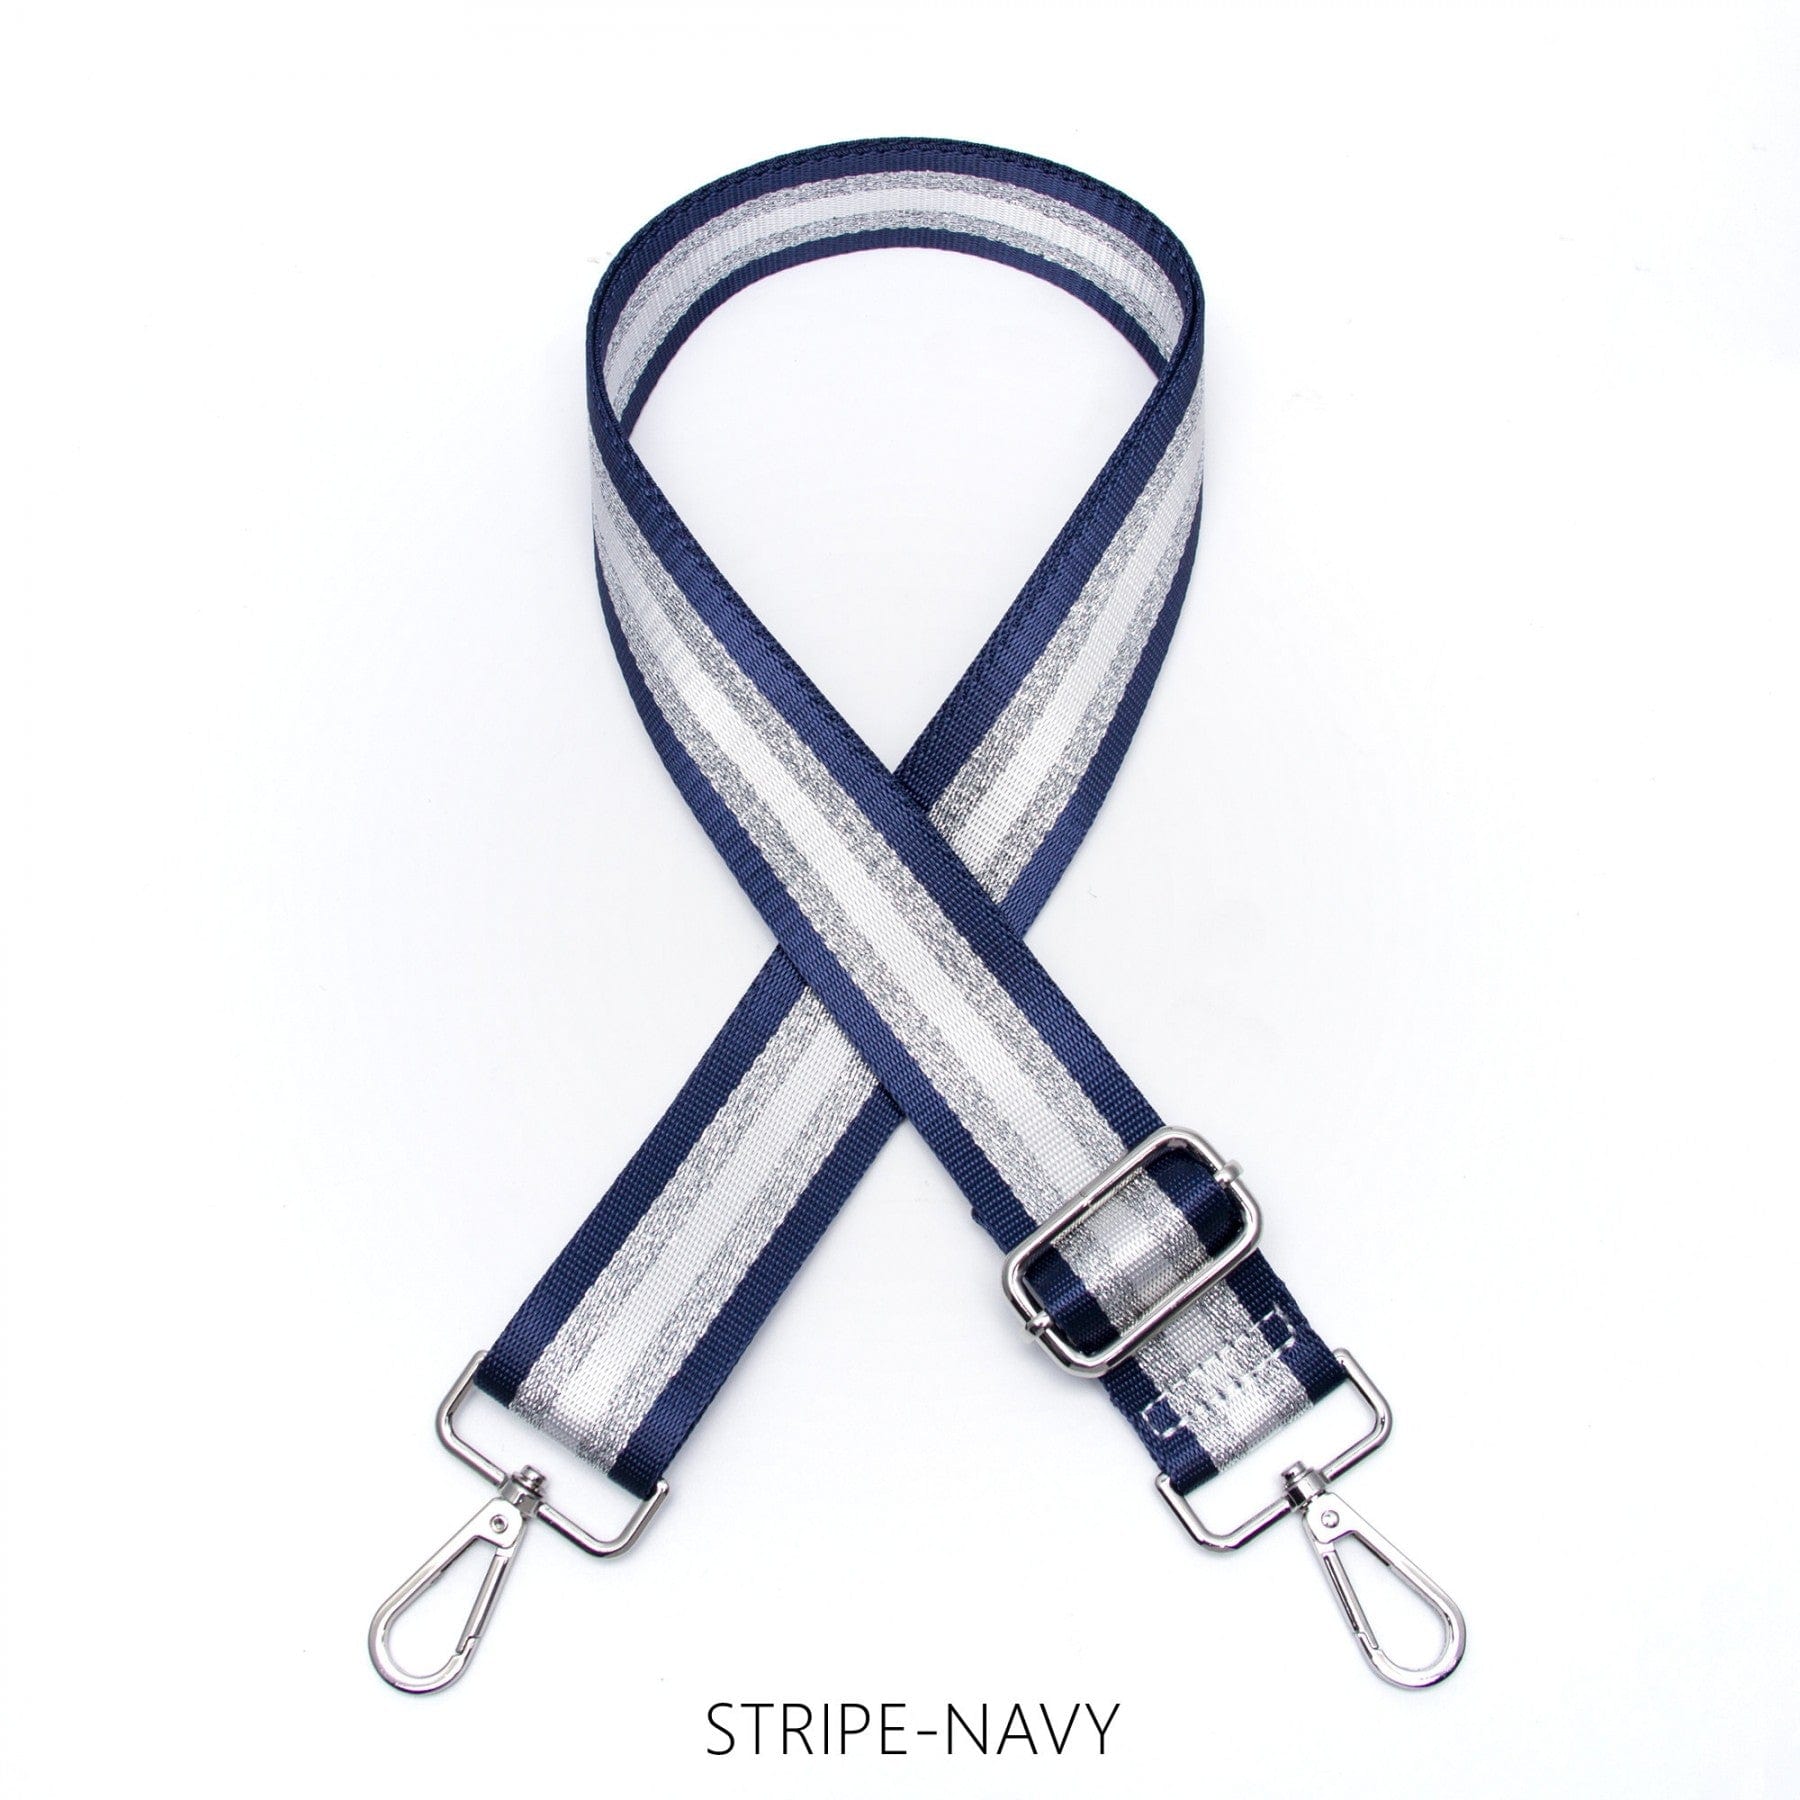 lusciousscarves Apparel & Accessories Stripe-Navy Slim Interchangeable Handbag Straps with Silver Hardware